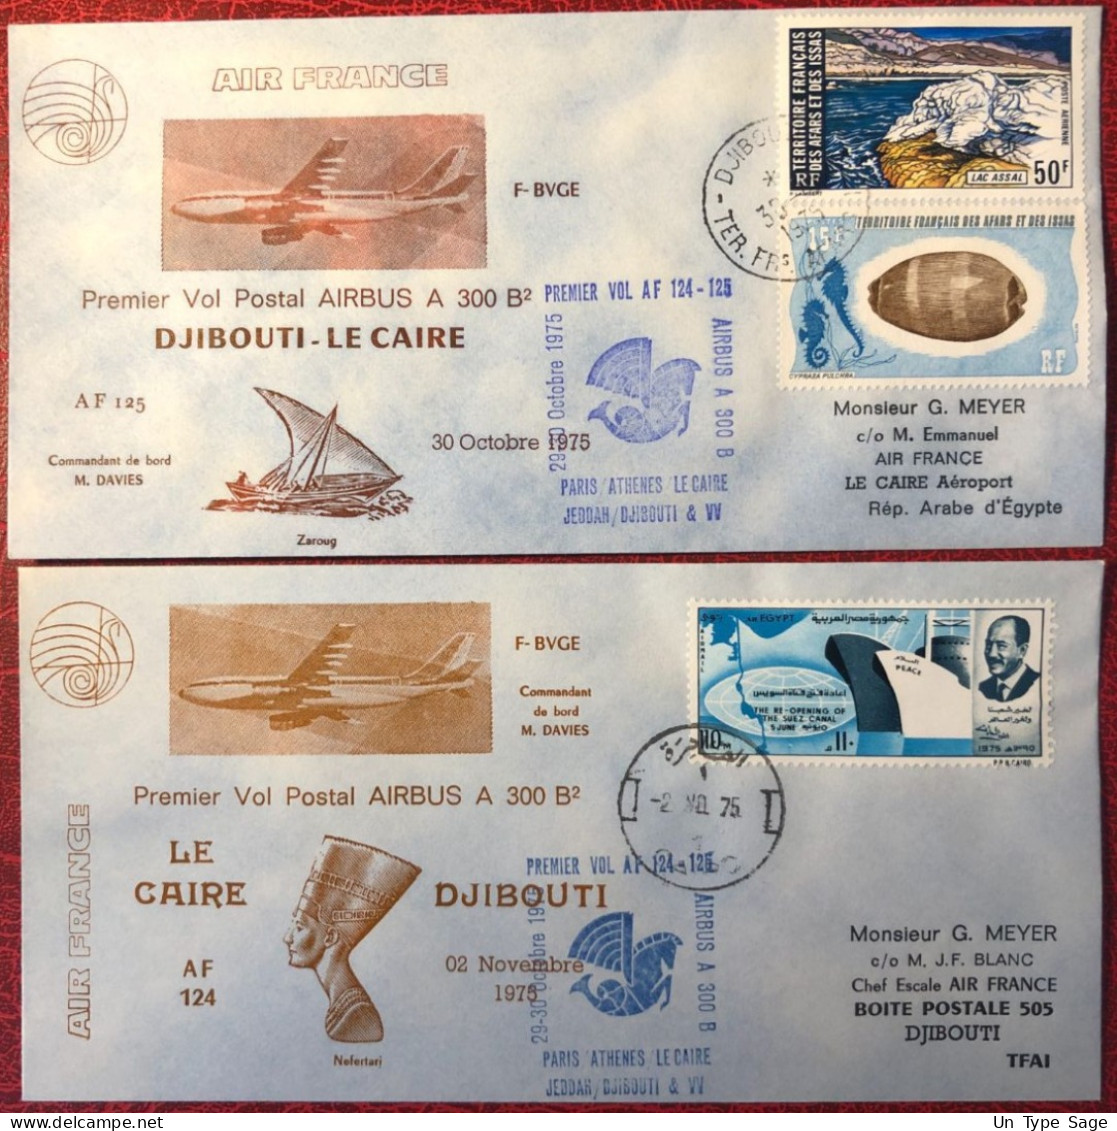 France, Premier Vol (Airbus A300) LE CAIRE / DJIBOUTI 2.11.1975- 2 Enveloppes - (A1402) - First Flight Covers